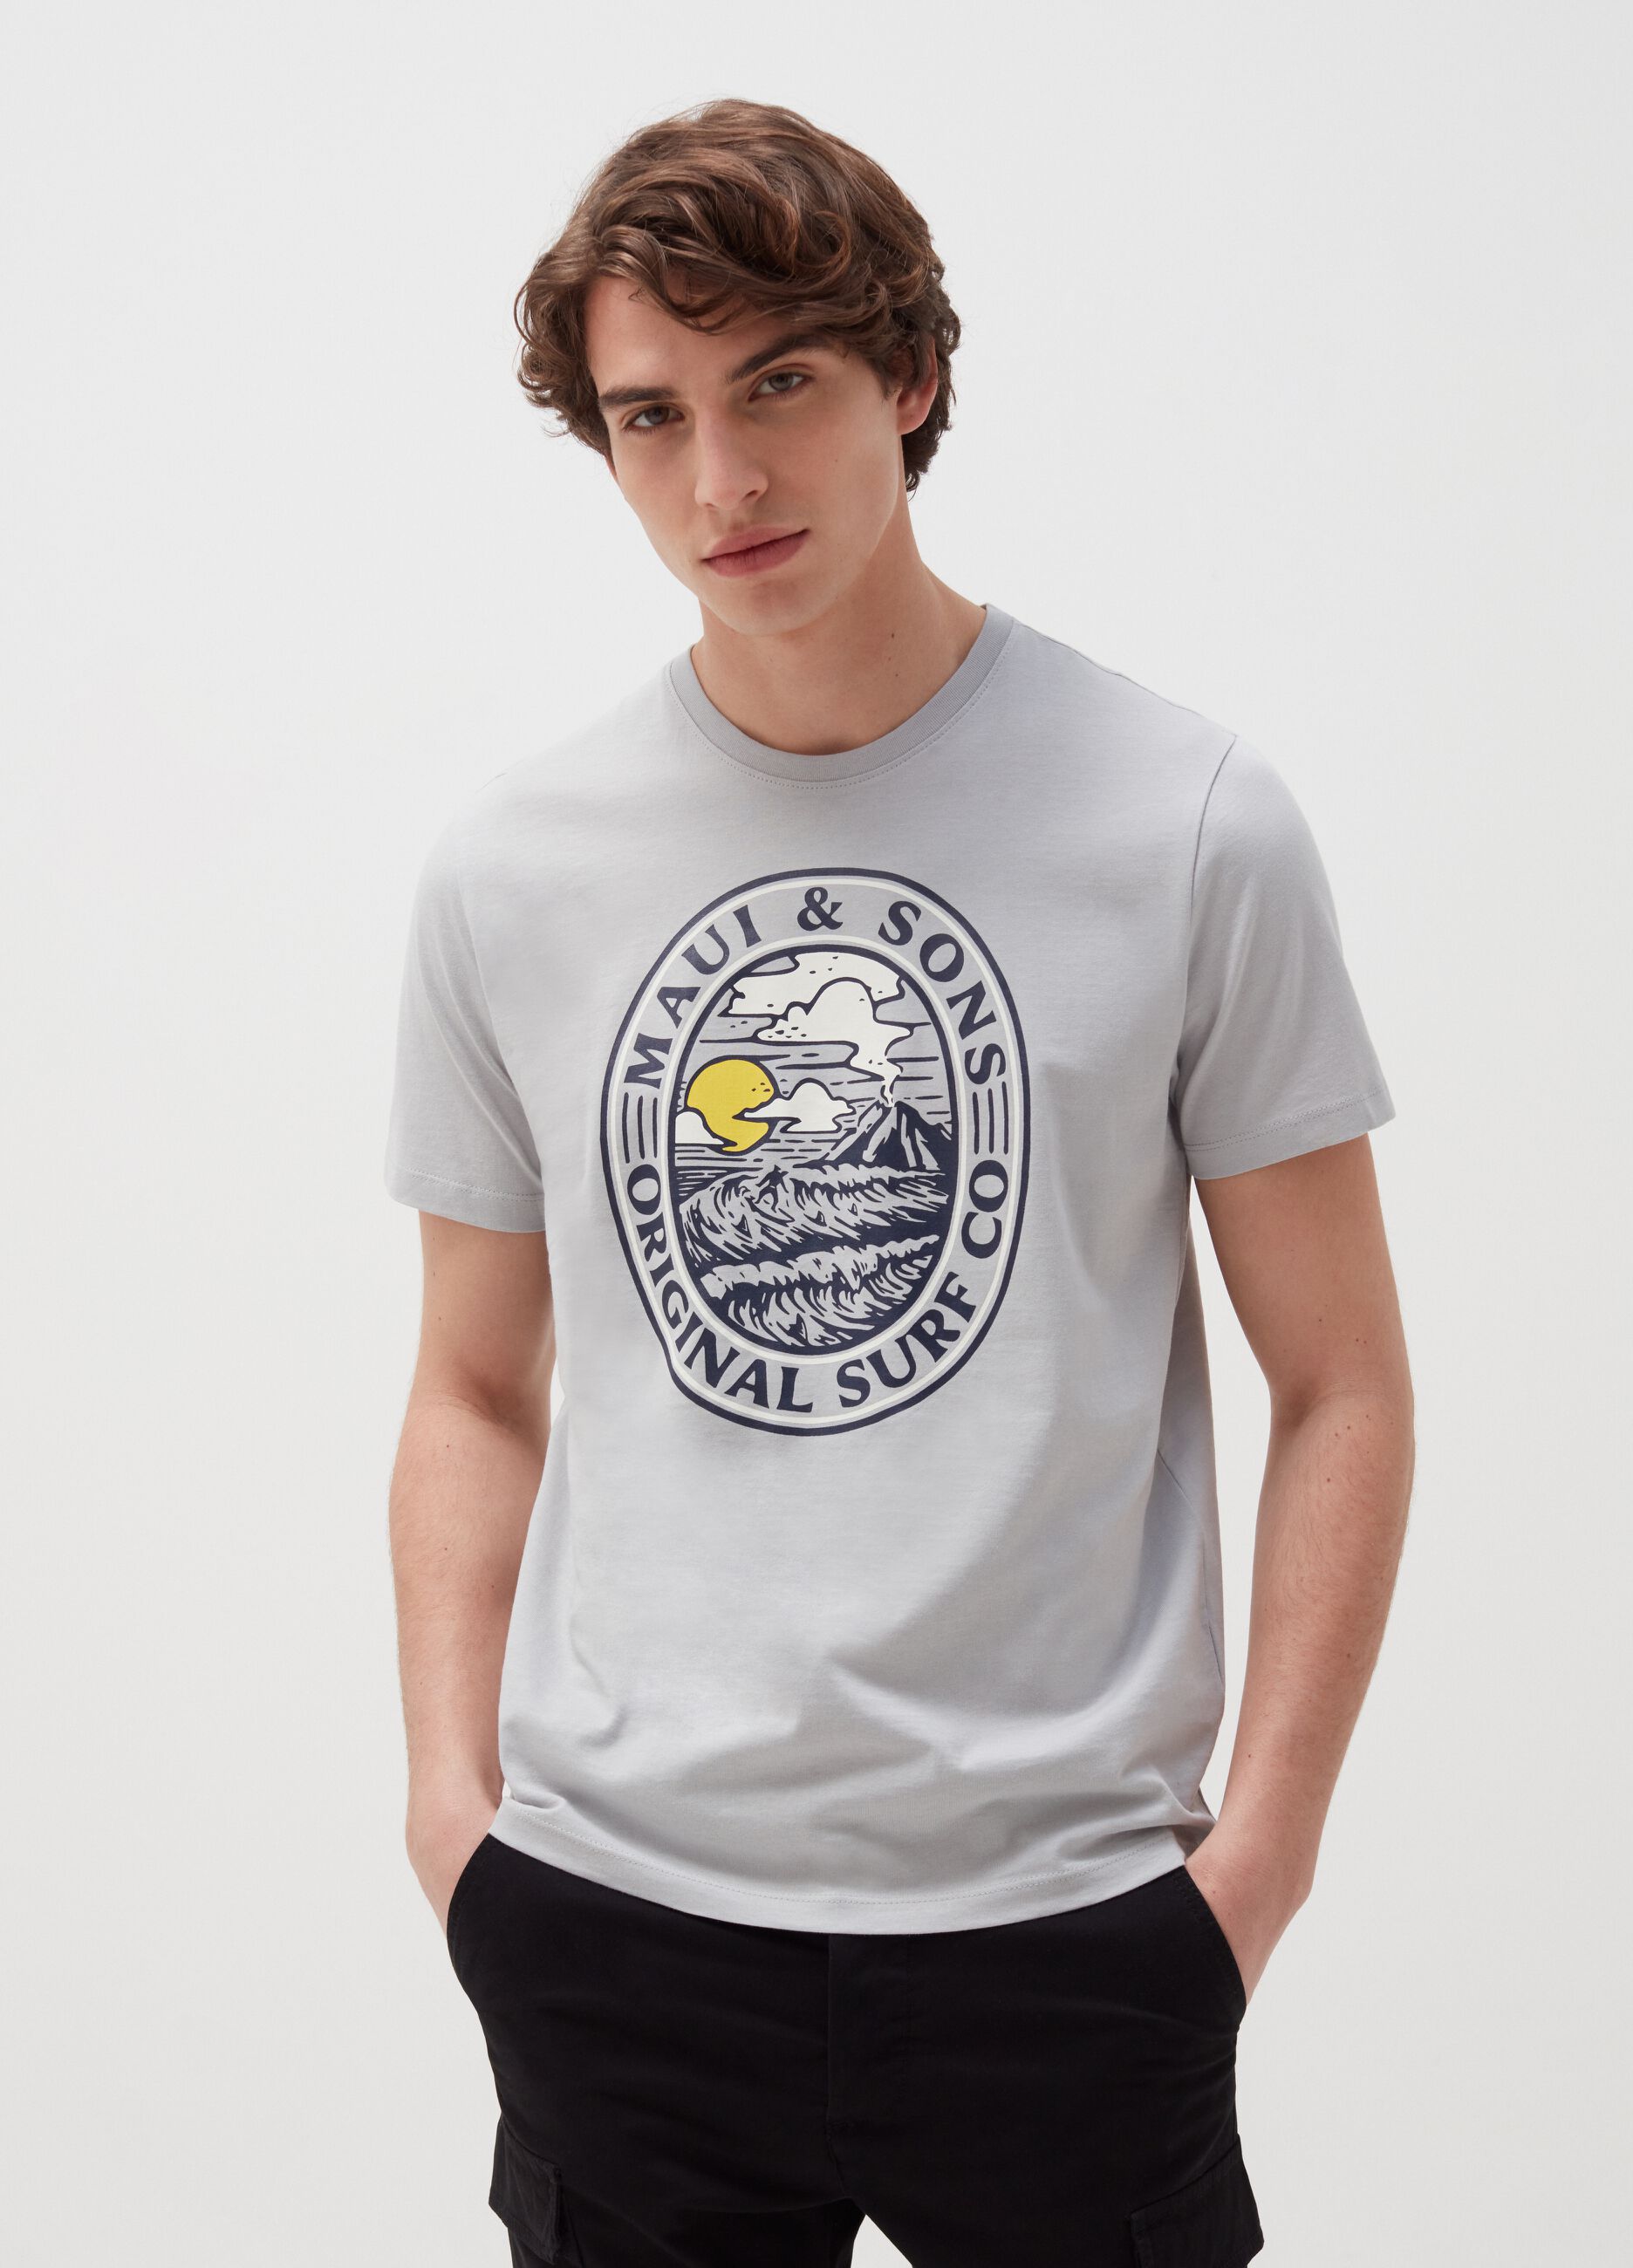 Cotton T-shirt with Maui and Sons surf print